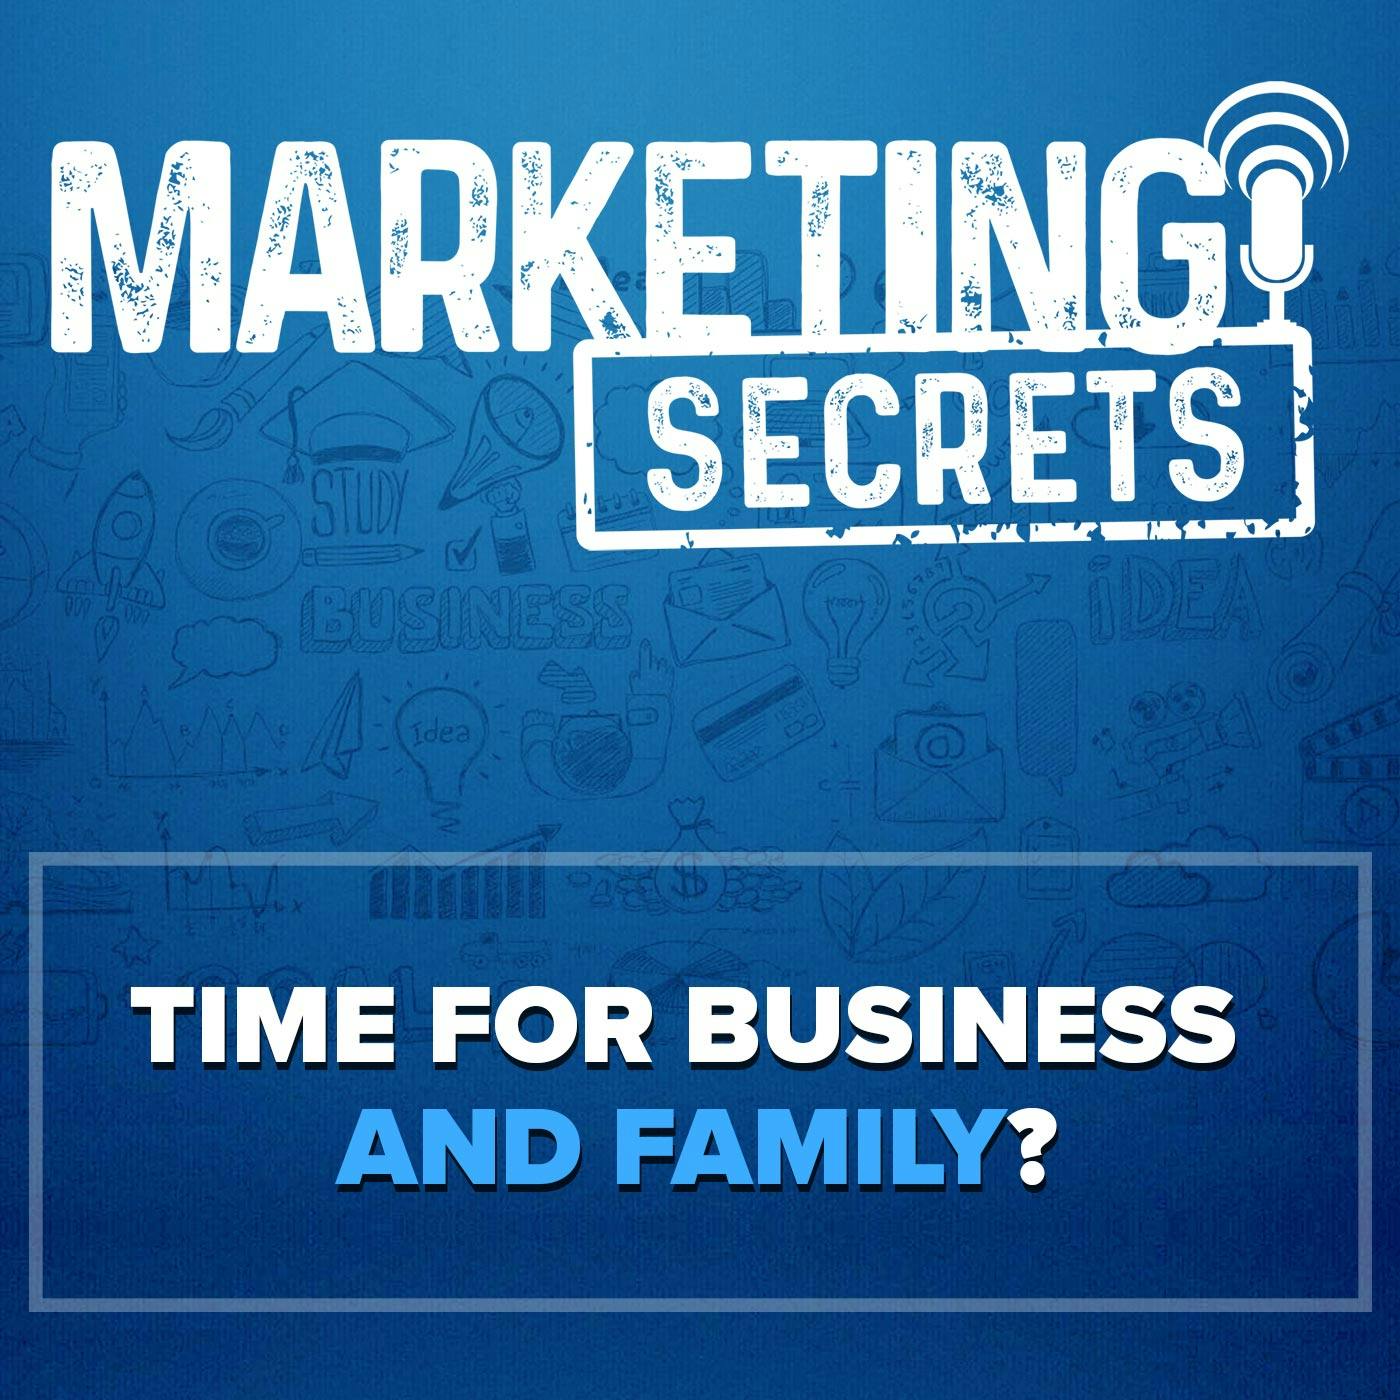 Time For Business And Family?